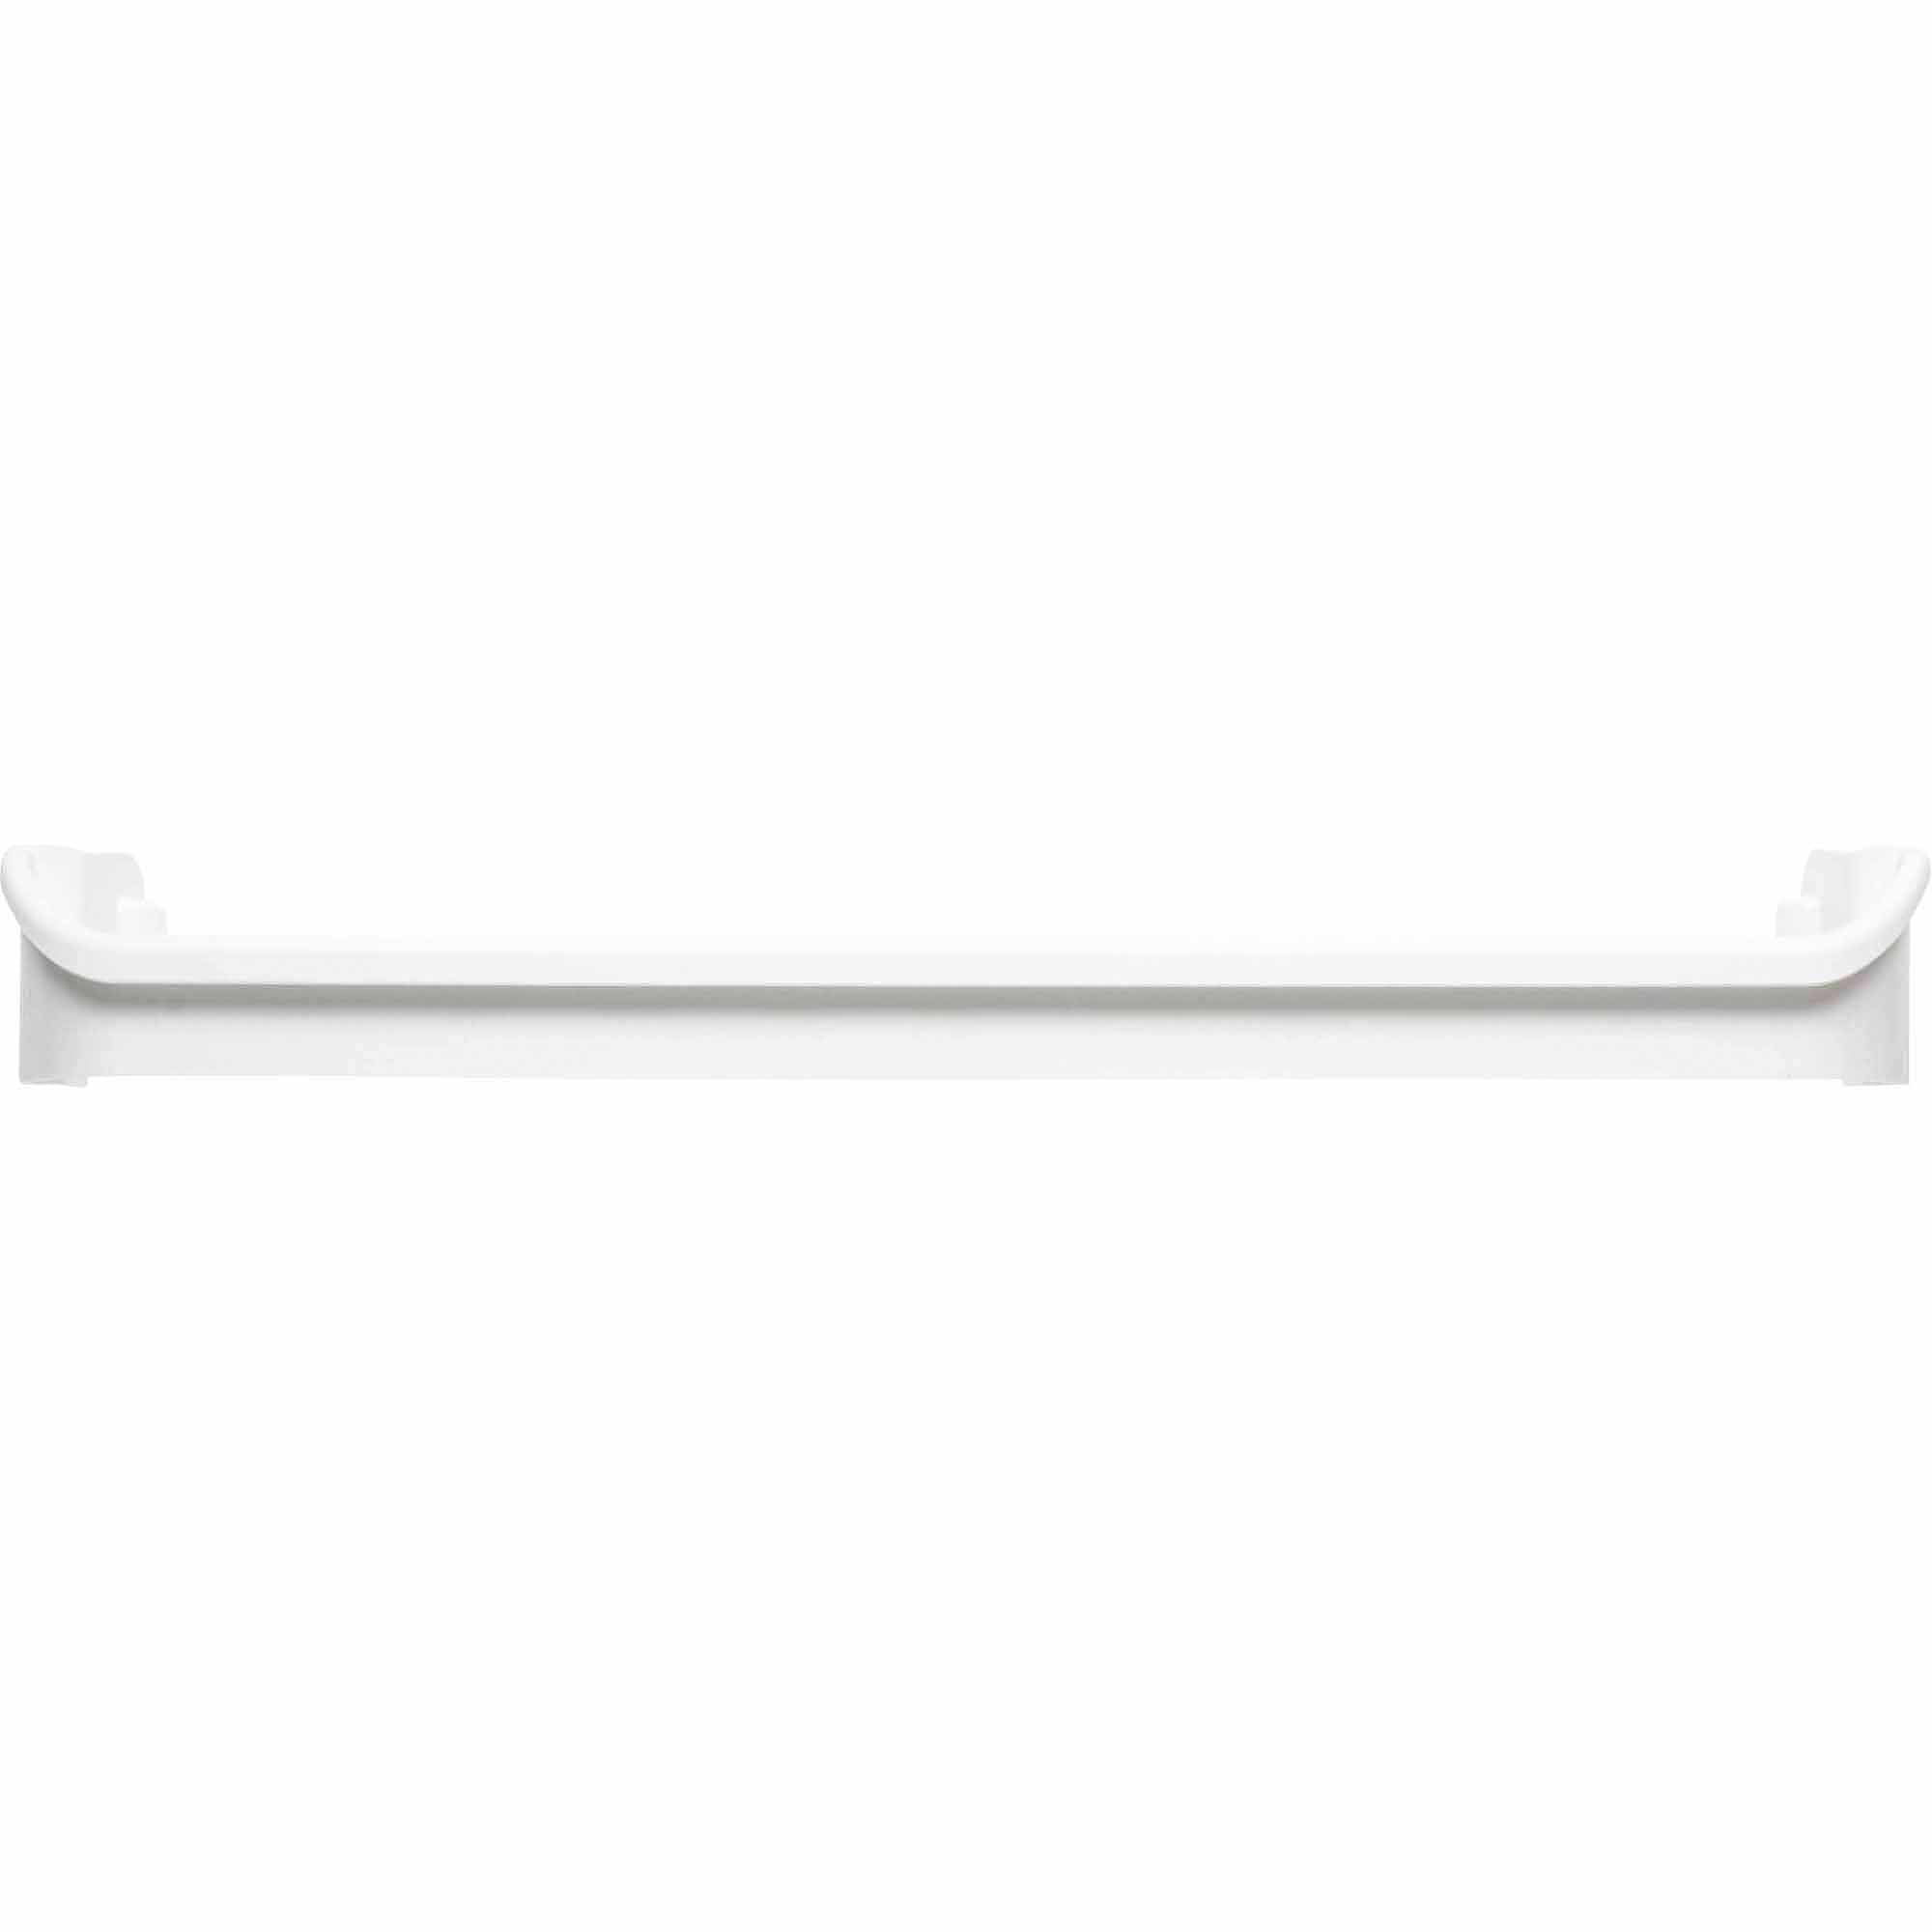 For Frigidaire Refrigerator RIGHT Side Meat Pan Hanger # LZ8306112PAFR455 